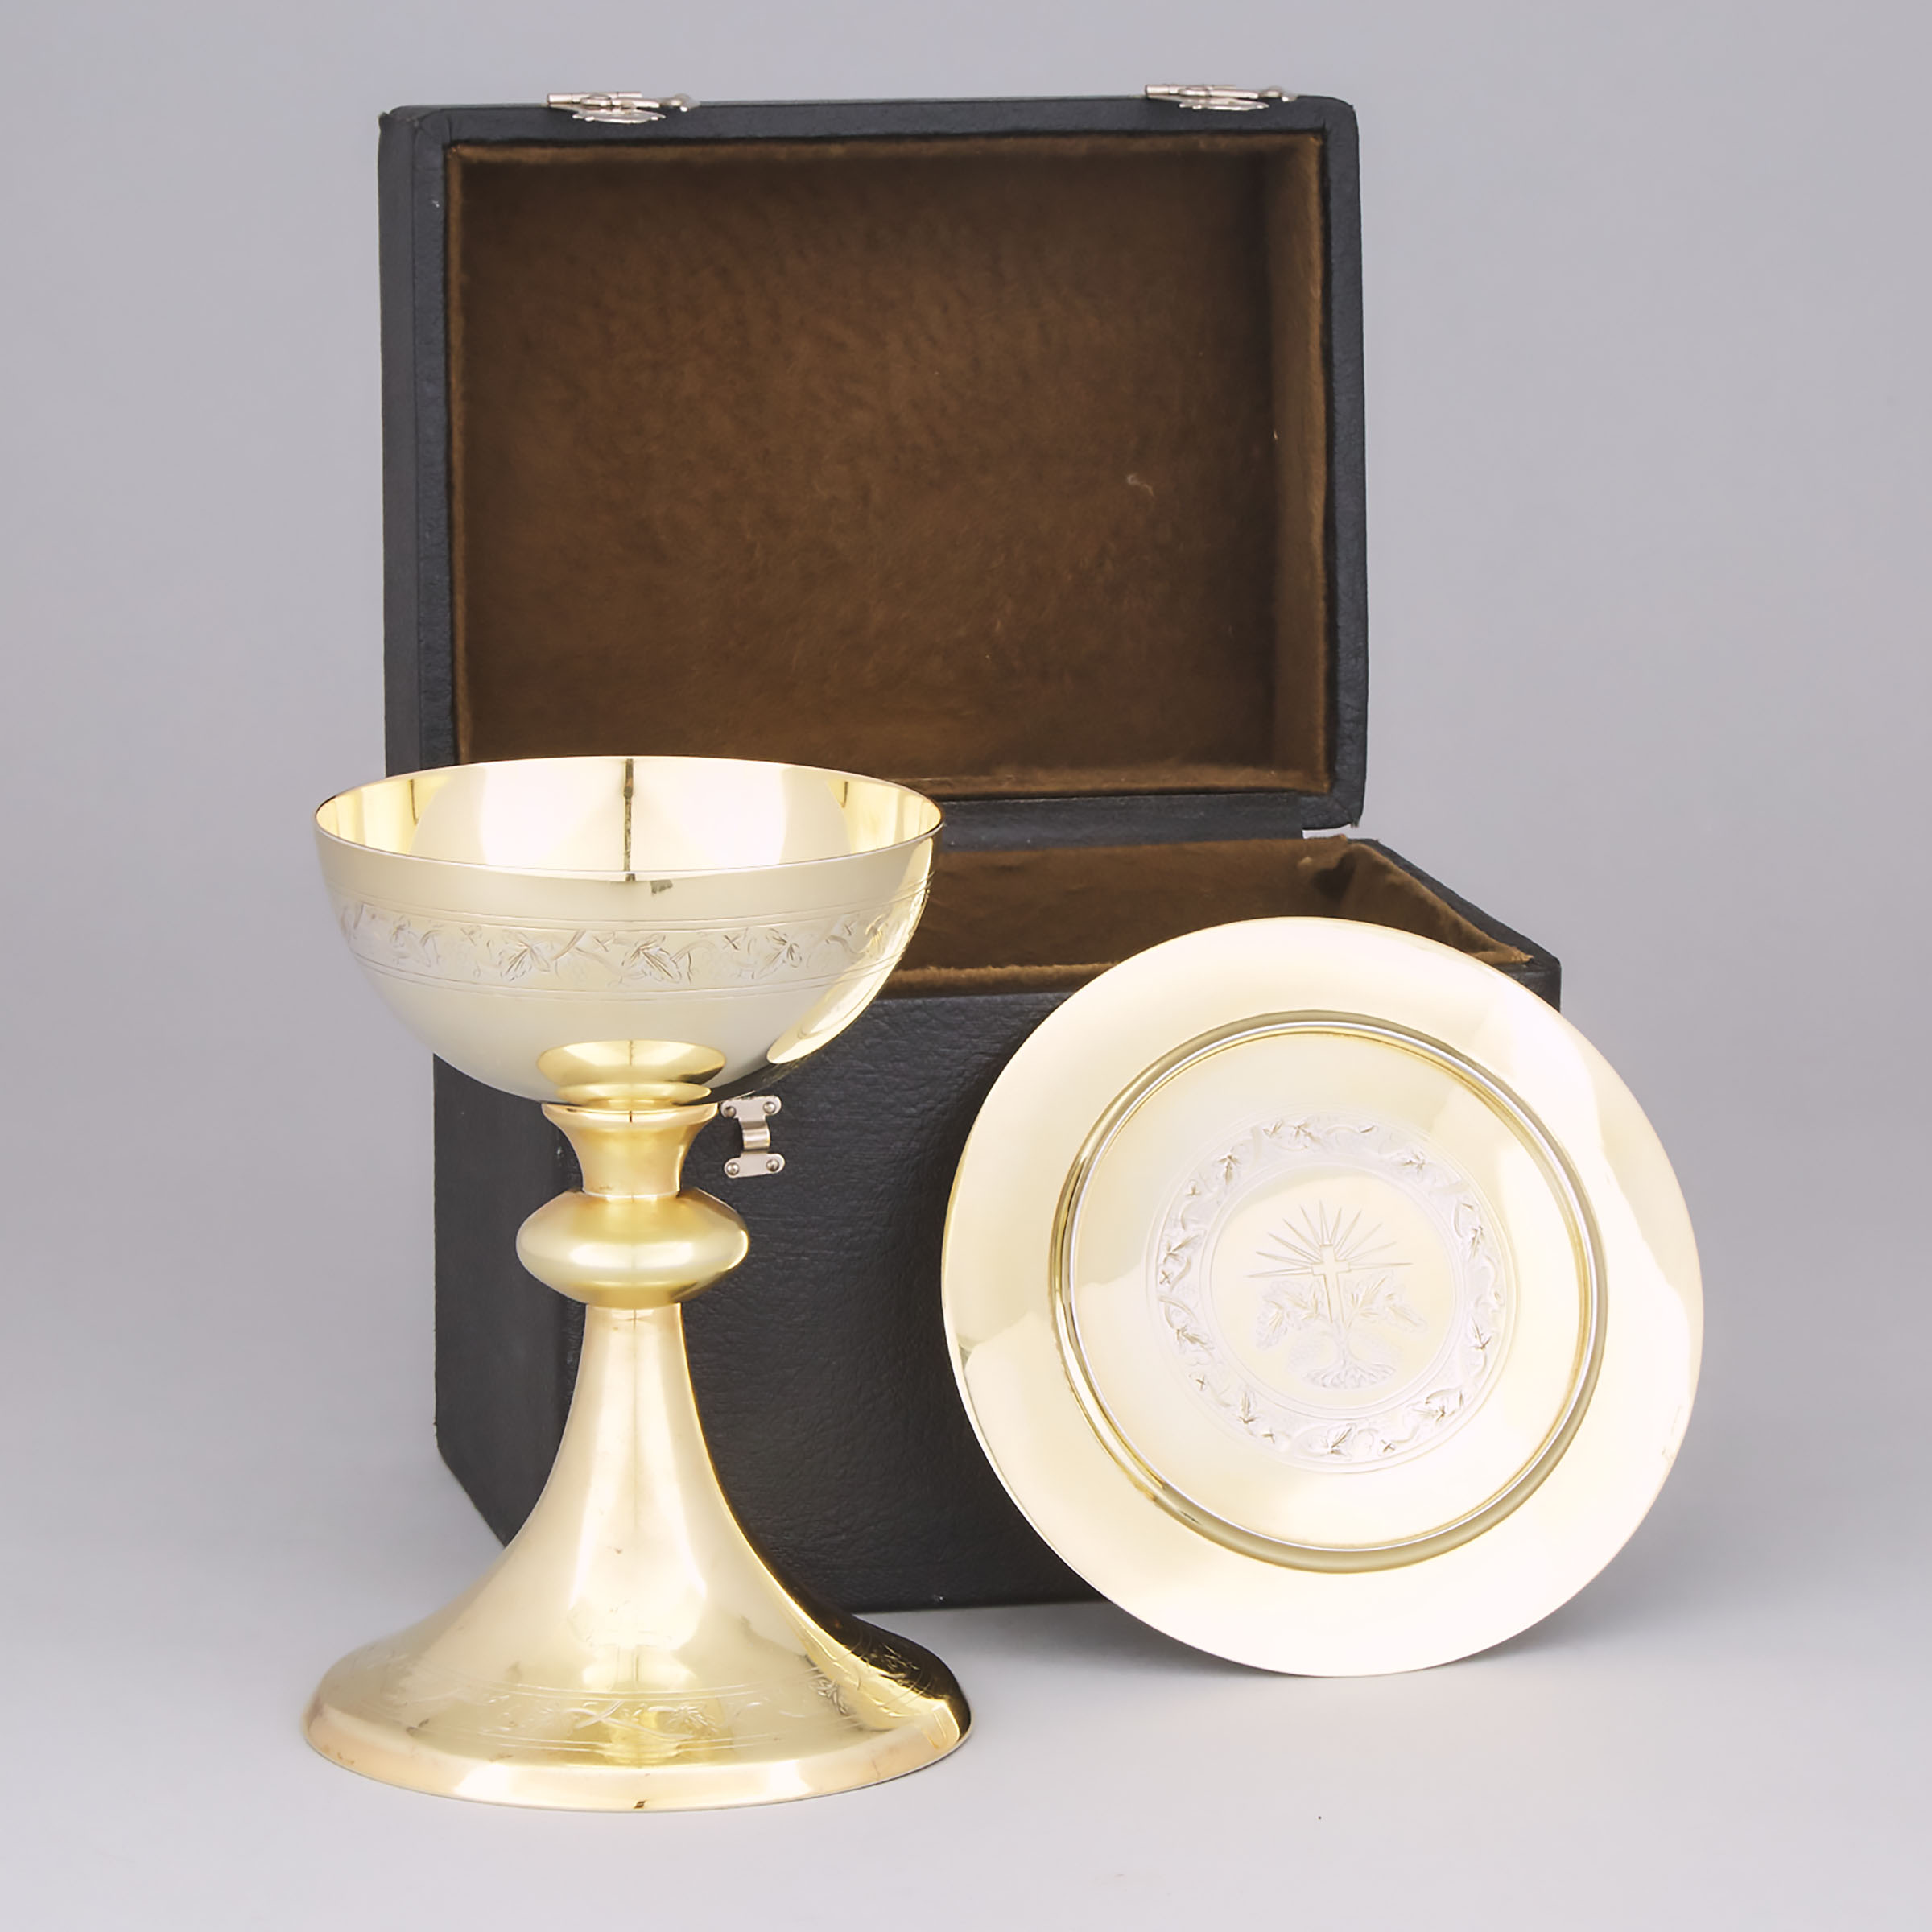 Canadian Silver-Gilt and Plated Chalice and Paten, Desmarais & Robitaille, Montreal, Que., early 20th century